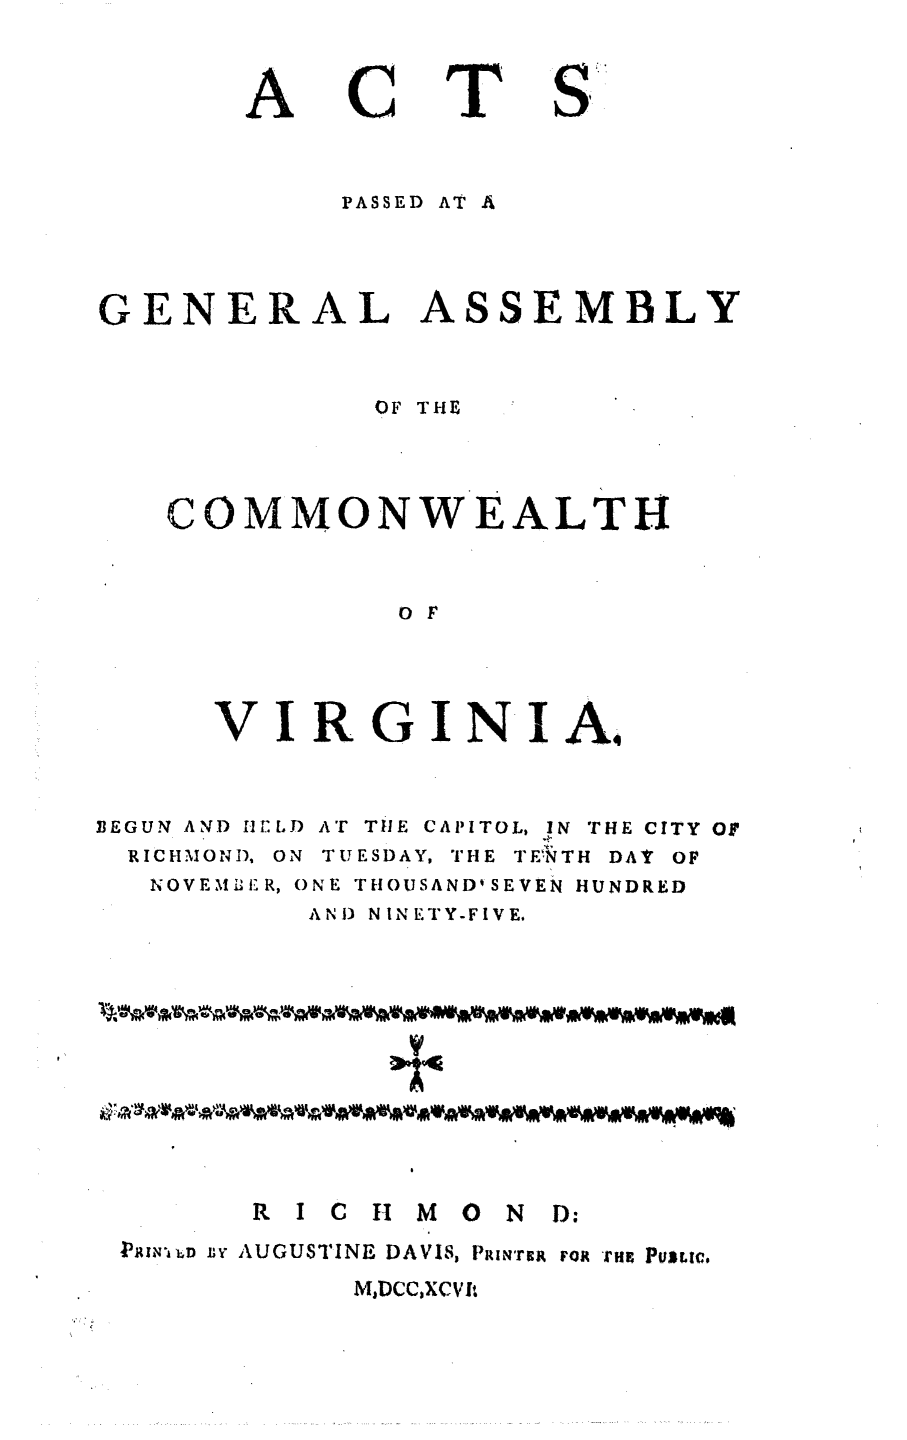 handle is hein.ssl/ssva0183 and id is 1 raw text is: ACTPASSED AT AGENERAL ASSEMBLYOF THECOMMONWEALTHO FVIRGINIA,BEGUN AND HELDRICHMOND, ONAT TlE CAPITOL, IN THE CITY OFTUESDAY, THE TE'RTH DAT OFNOVEMI-ER, ONE THOUSAND'SEVEN HUNDREDAND) NINETY-FIVE.R I C H      M O     N D:PAhN-UD n AUGUSTINE DAVIS, PRIN'rcg rot rna PuLc,MaDCC)XCVfl